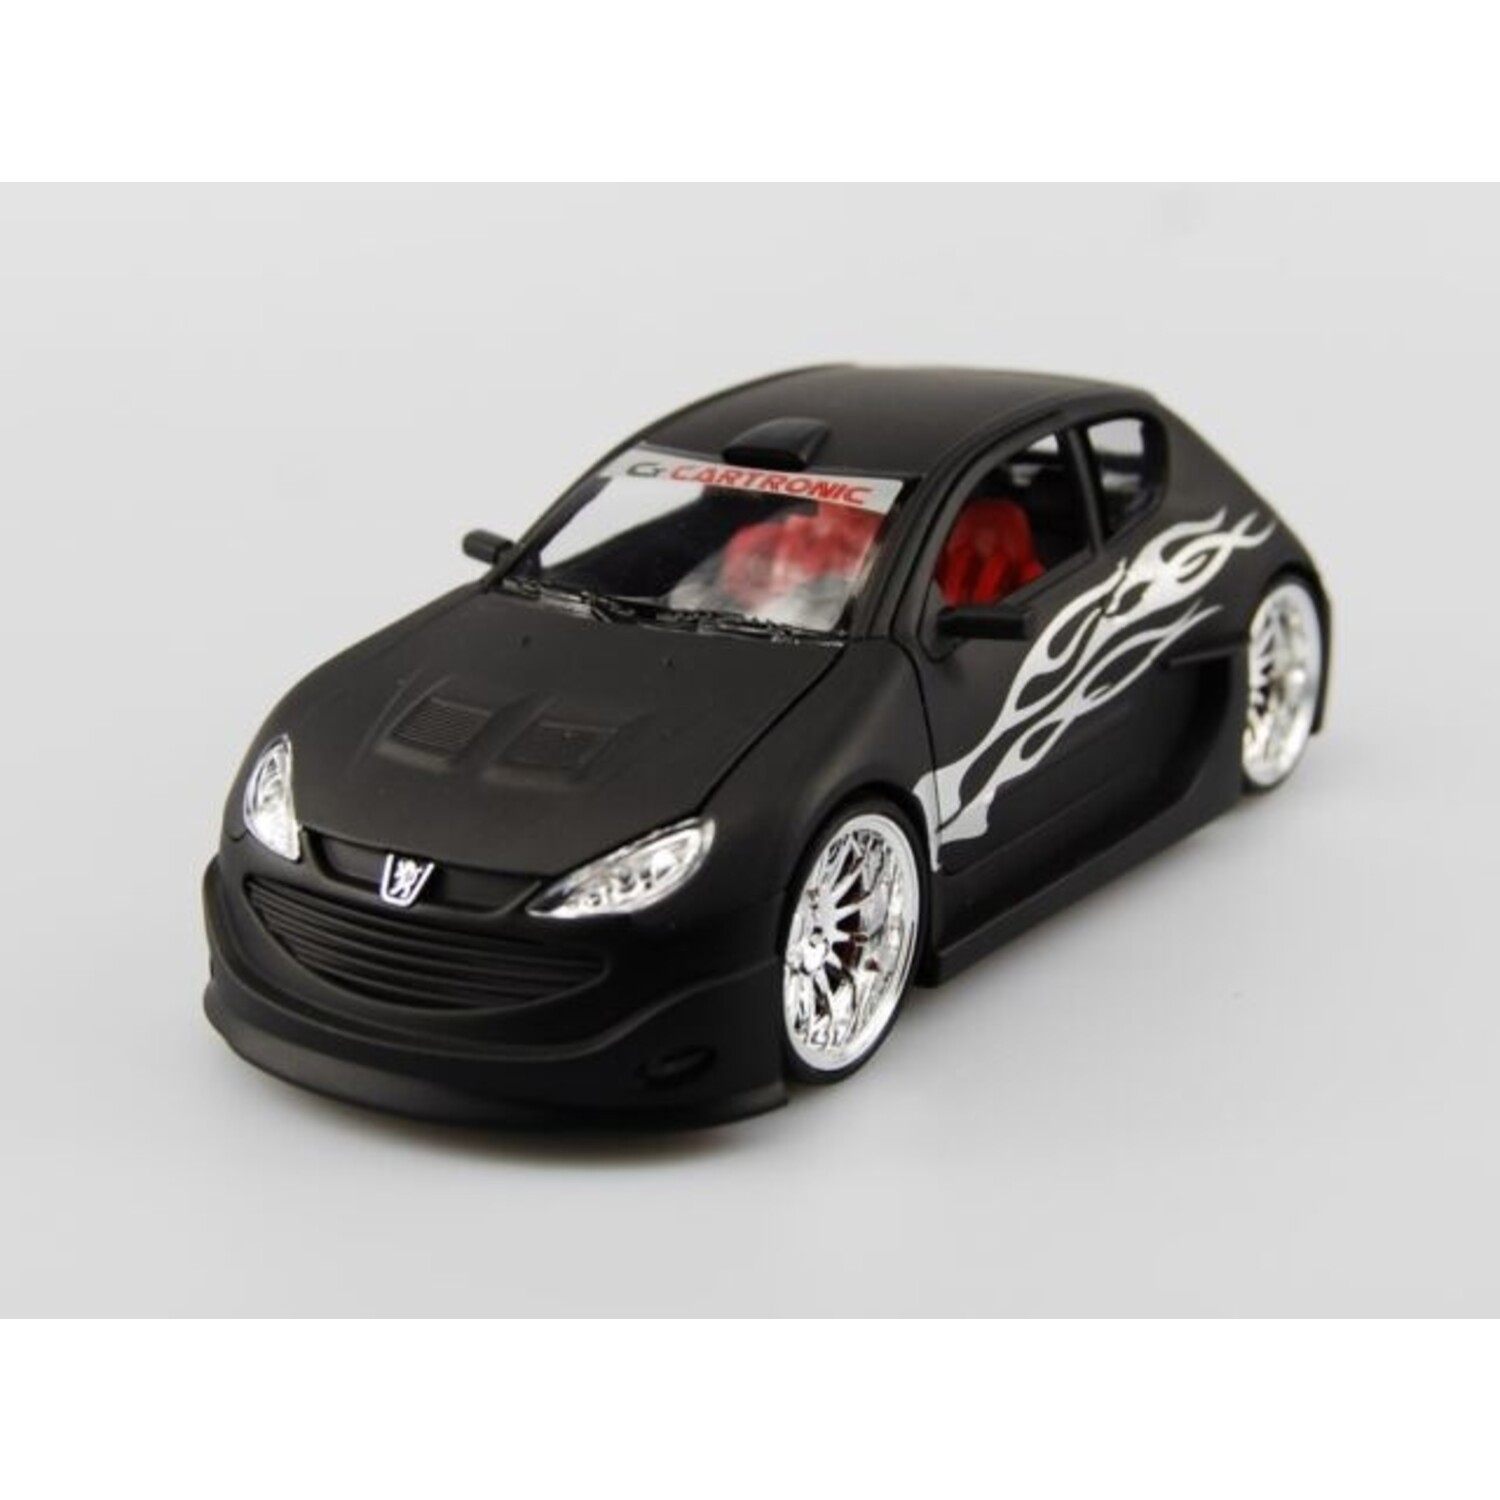 Peugeot 206 Tuning - 1:24 - Welly - HMKT